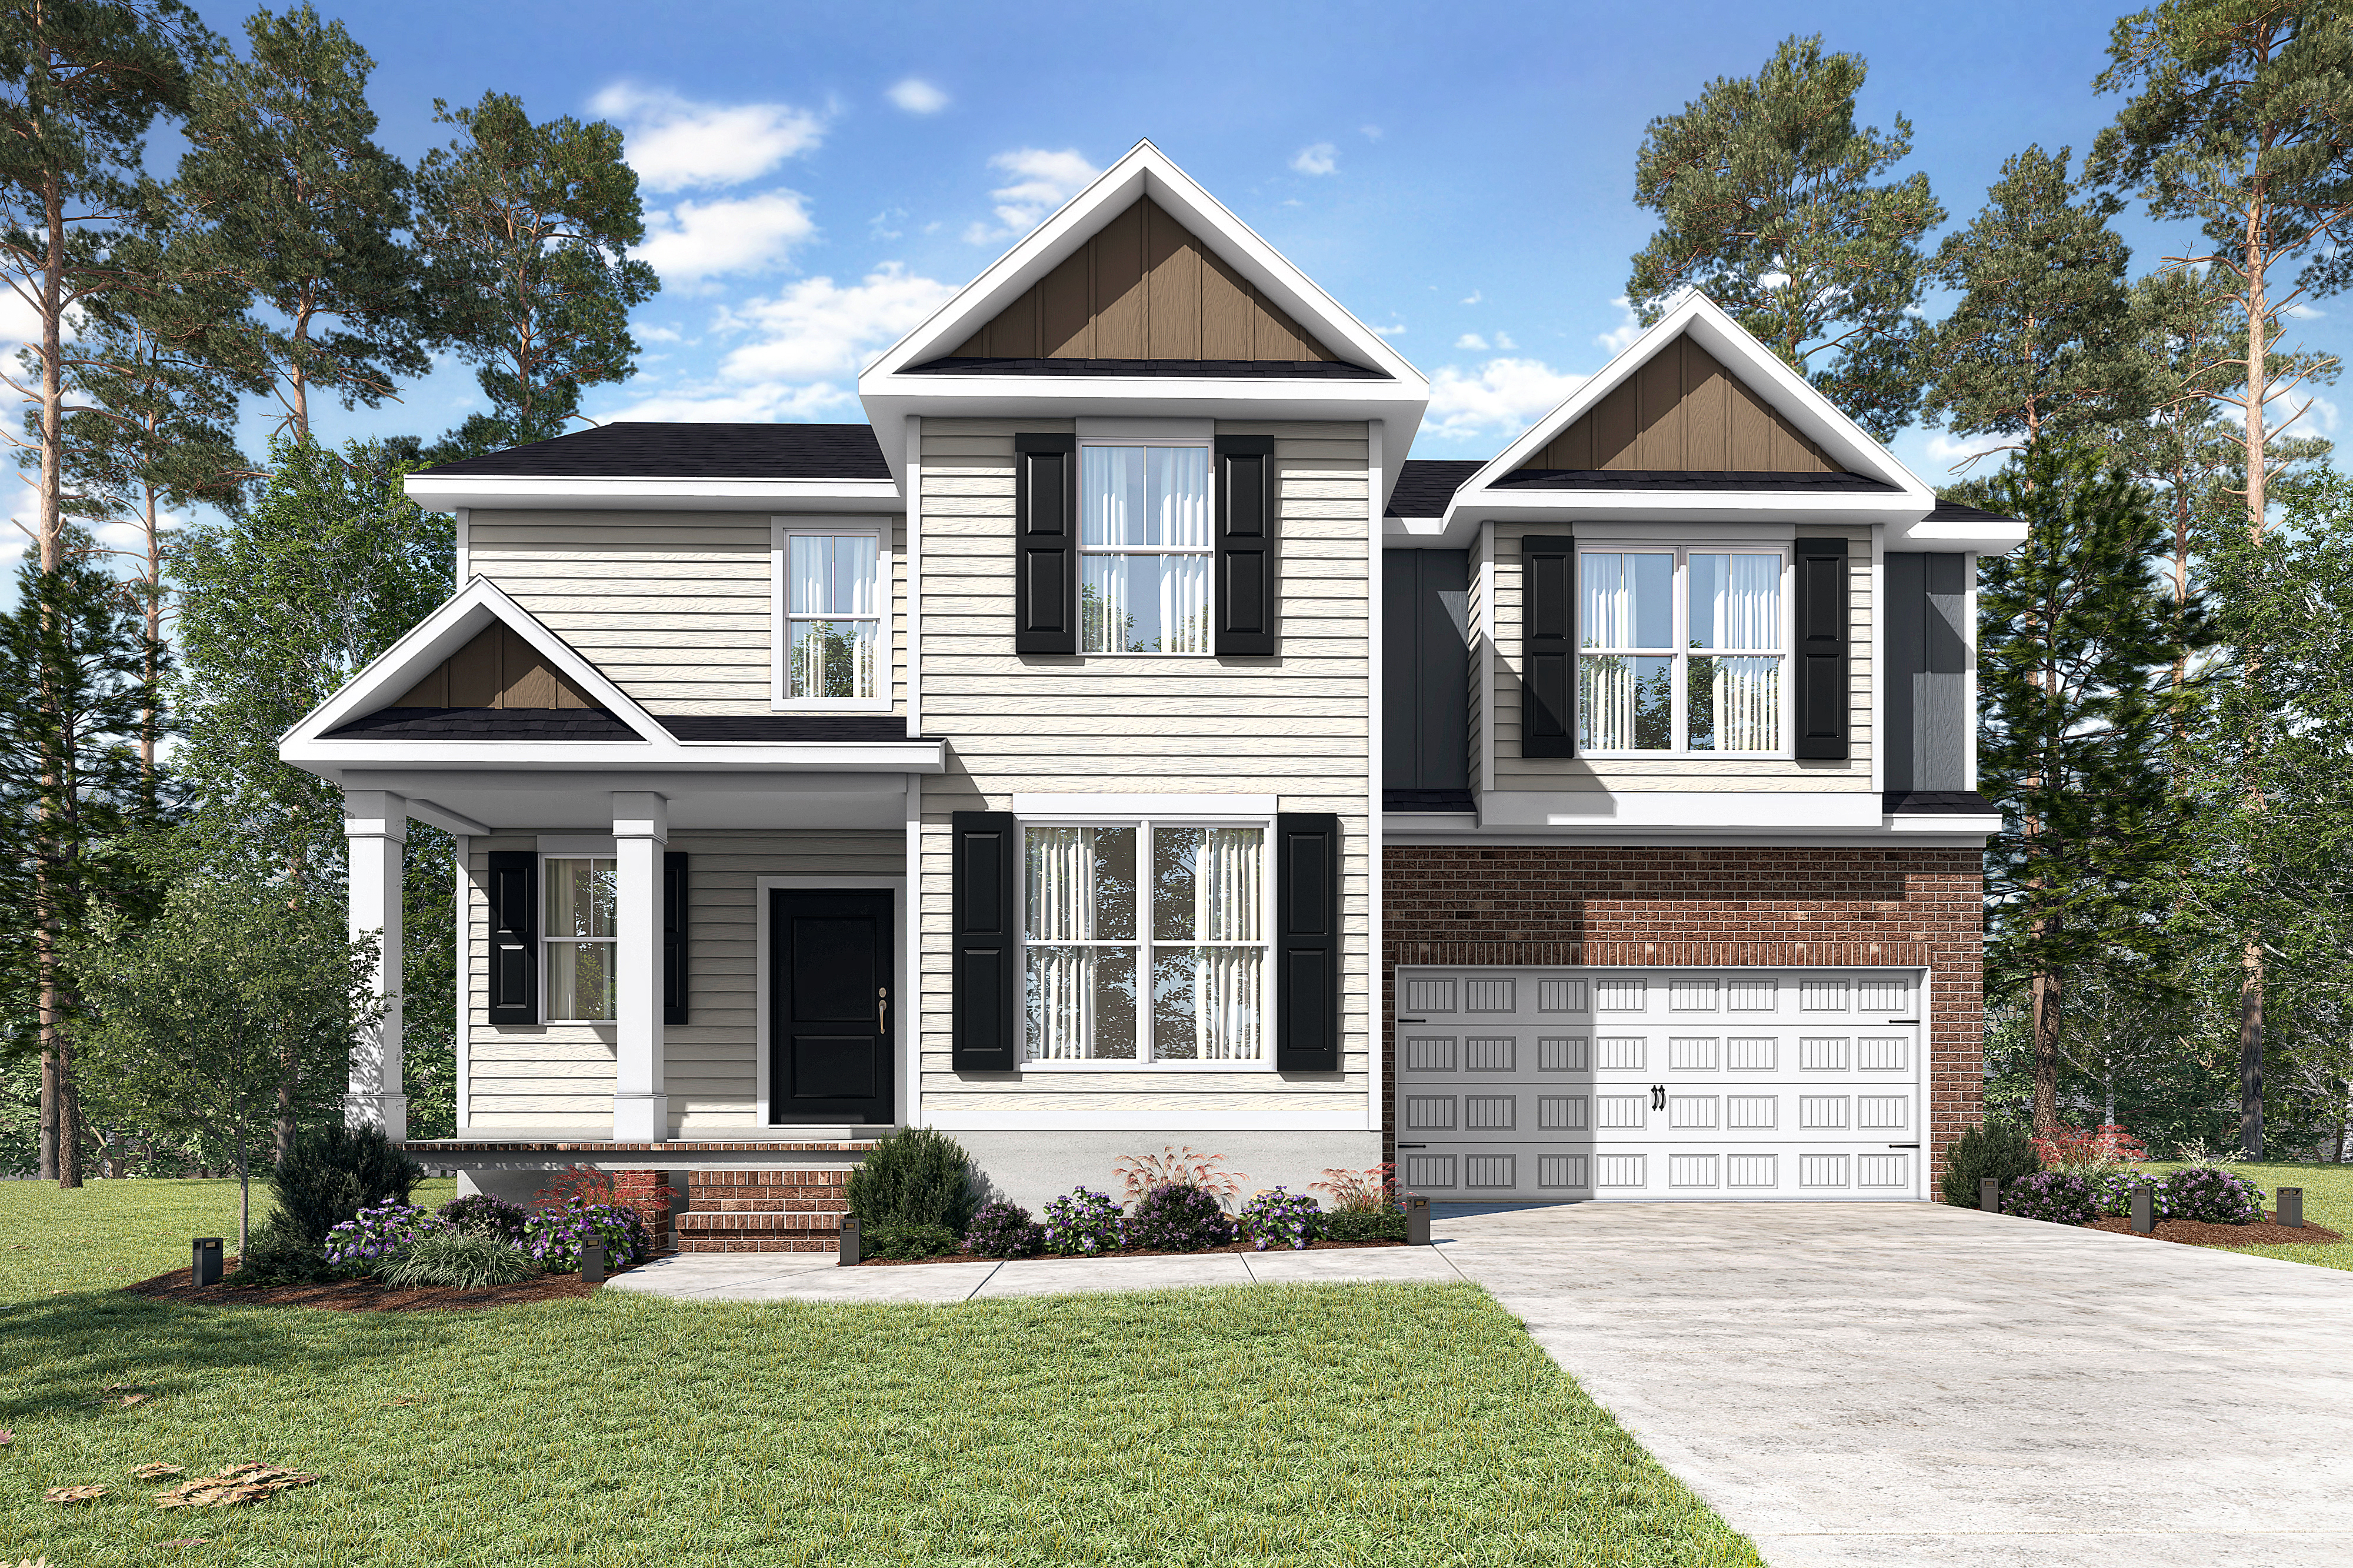 The Wildewood Plan by Executive Construction Homes